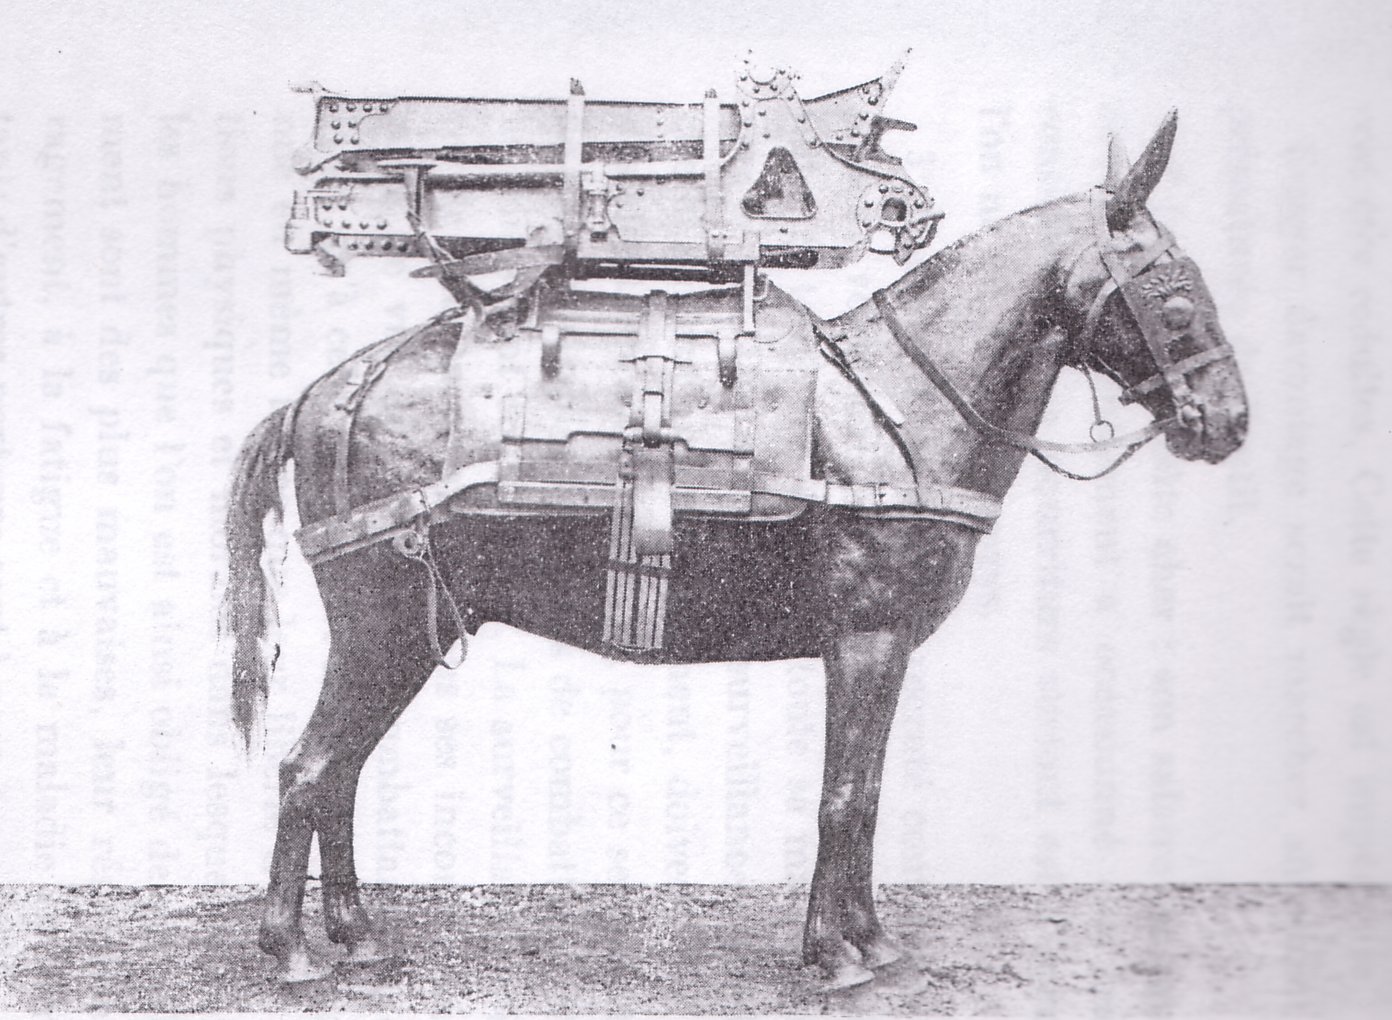 70mm carriage mounted on a pack mule